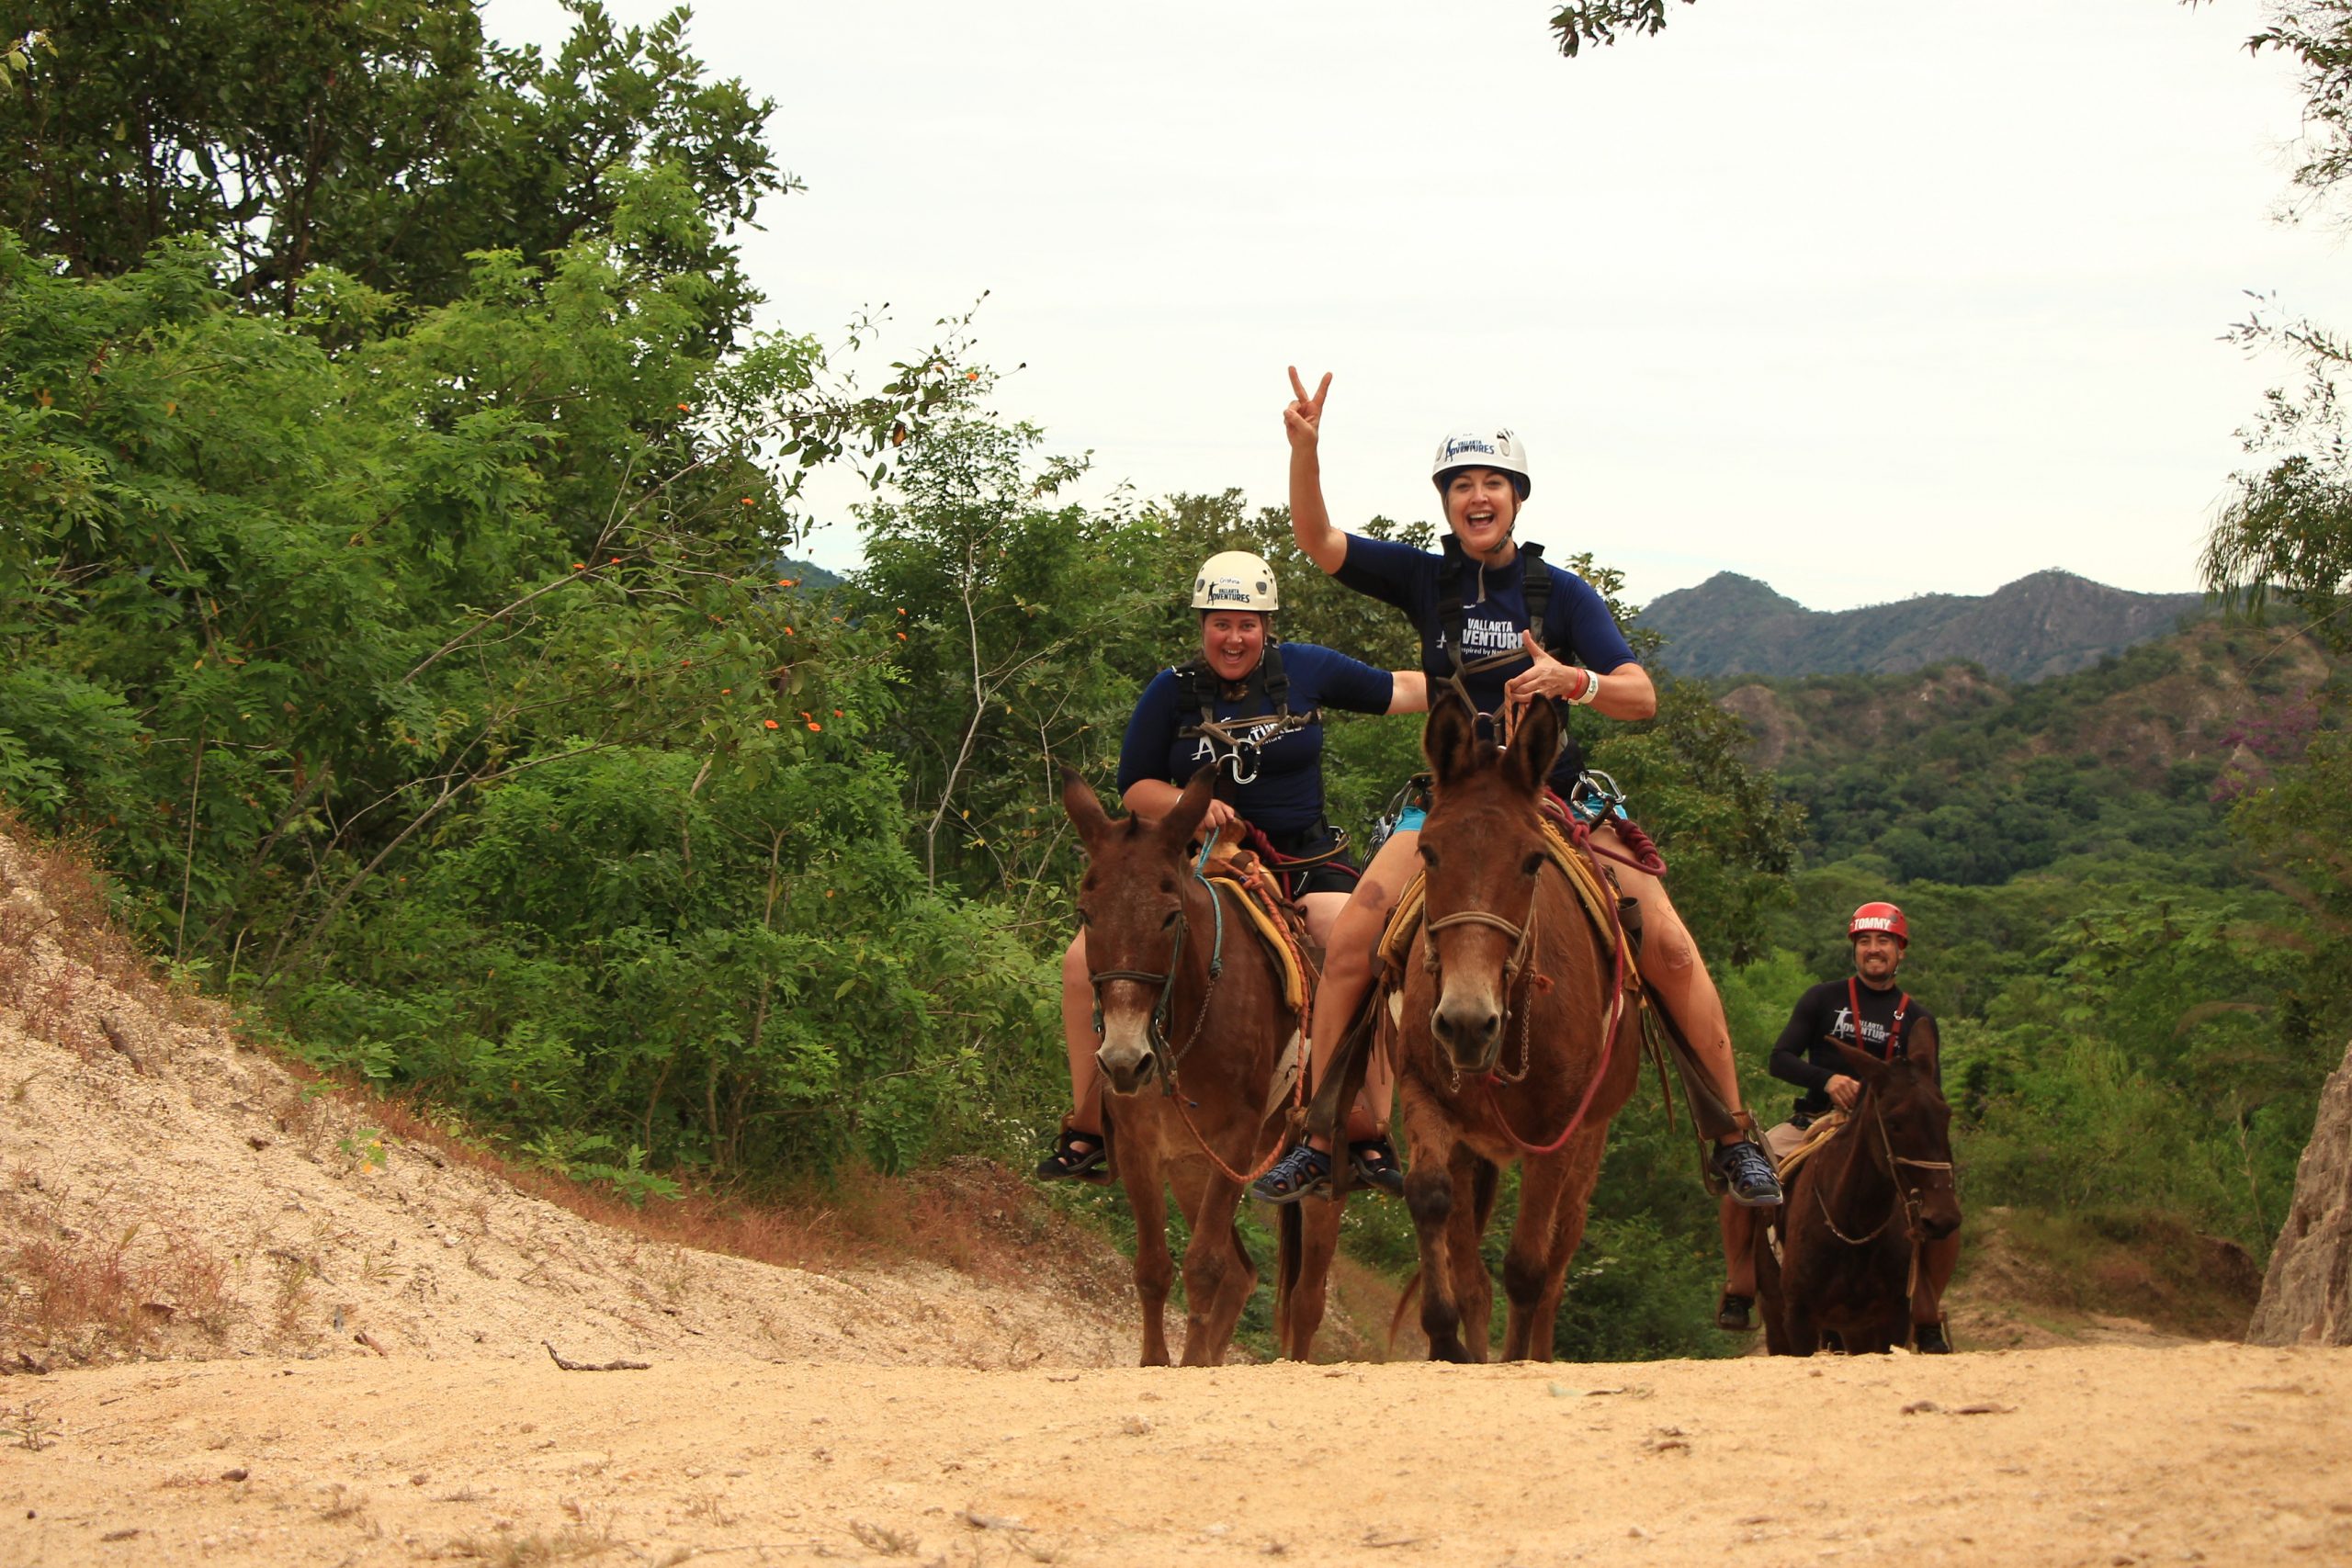 Two women and a man riding horses on dirt trail while smiling at camera.